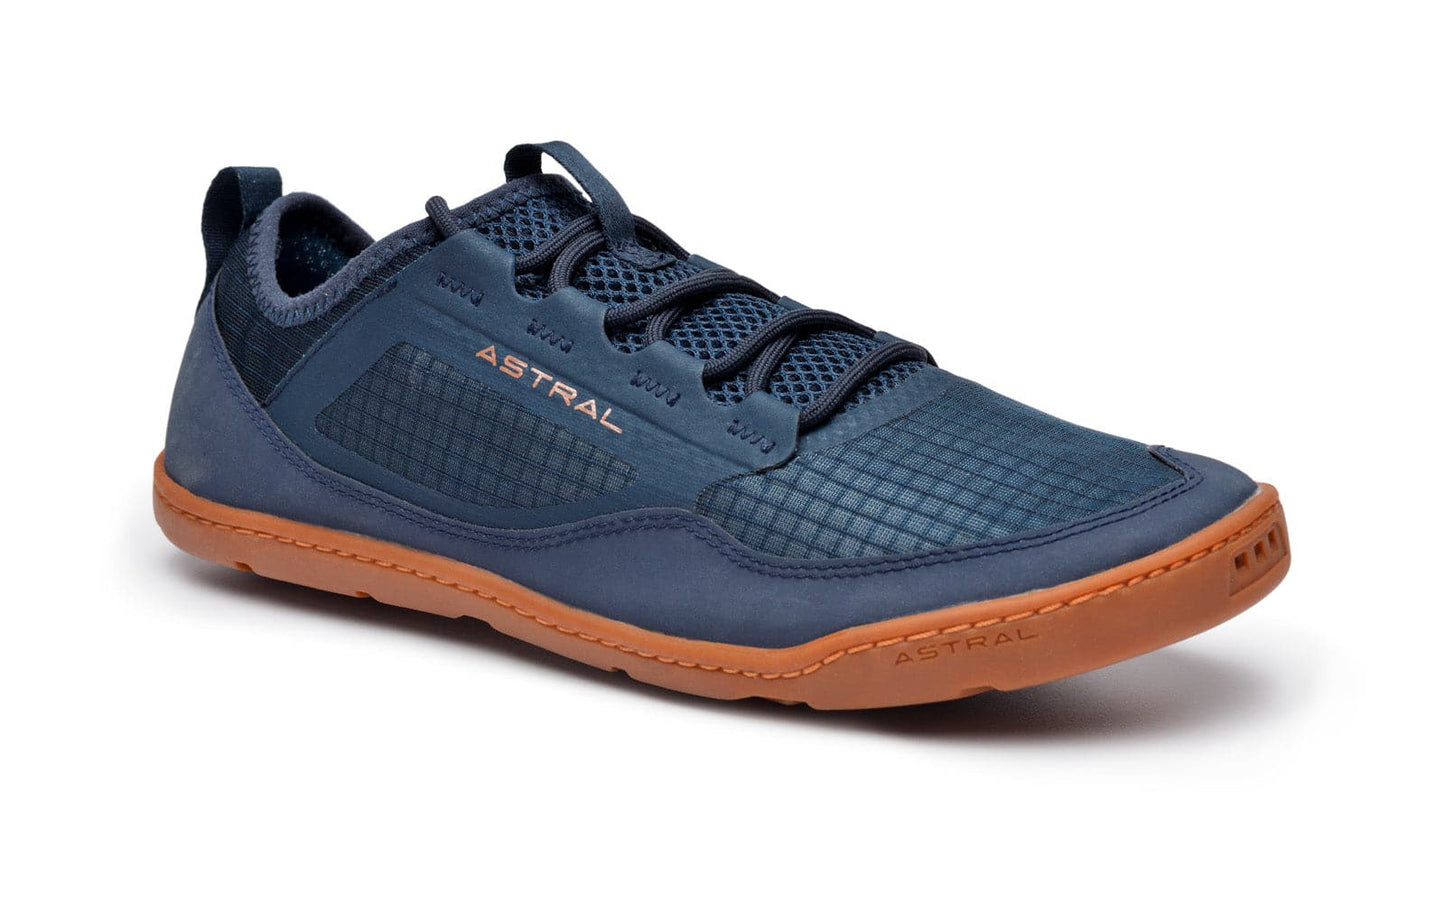 Featuring the Loyak AC - Men's men's footwear manufactured by Astral shown here from an eighth angle.